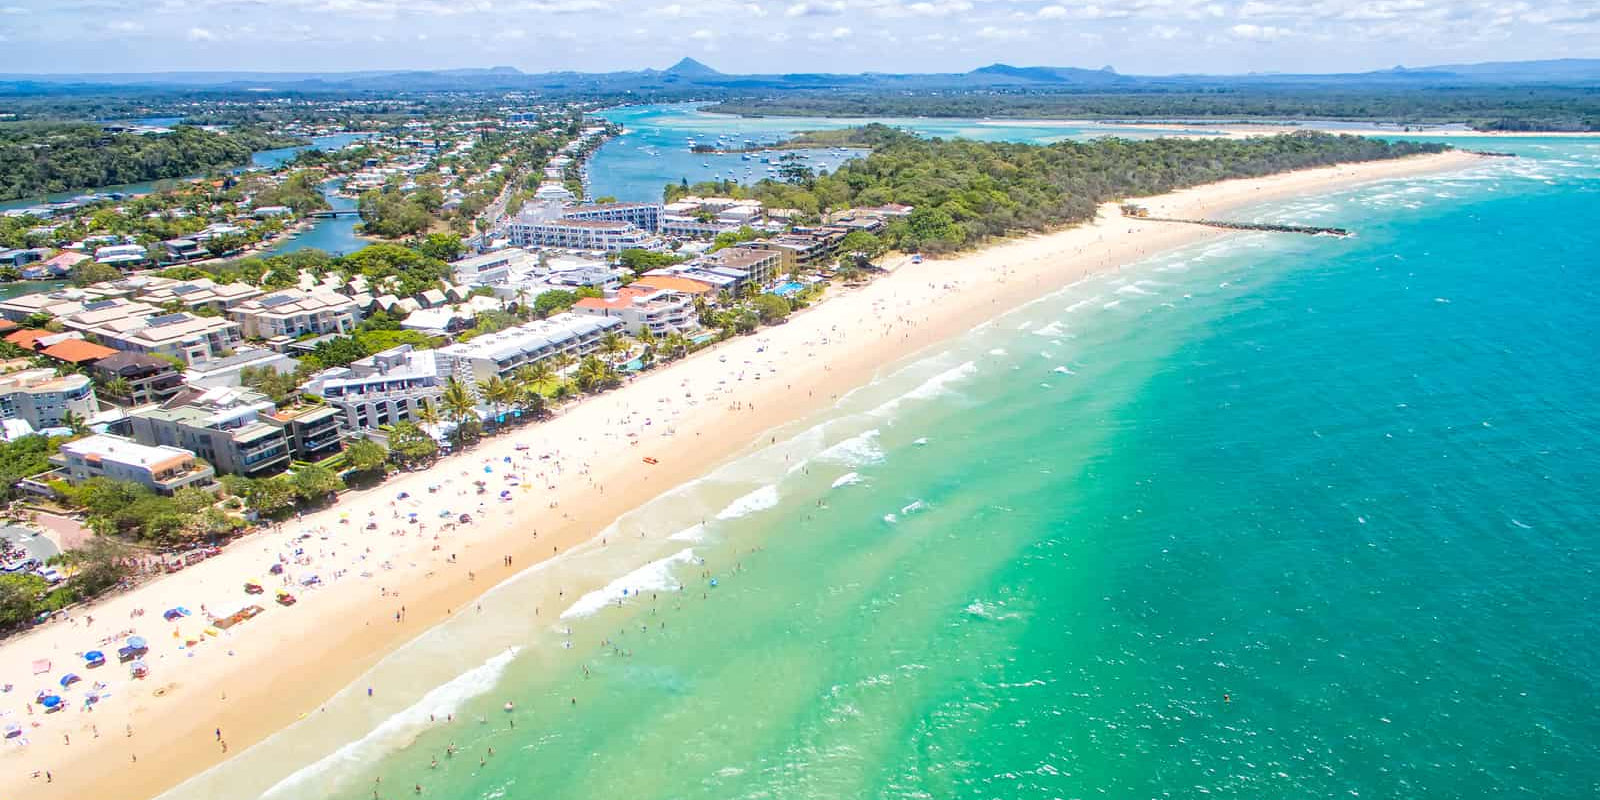 Guide to Swimming at Noosa, Queensland